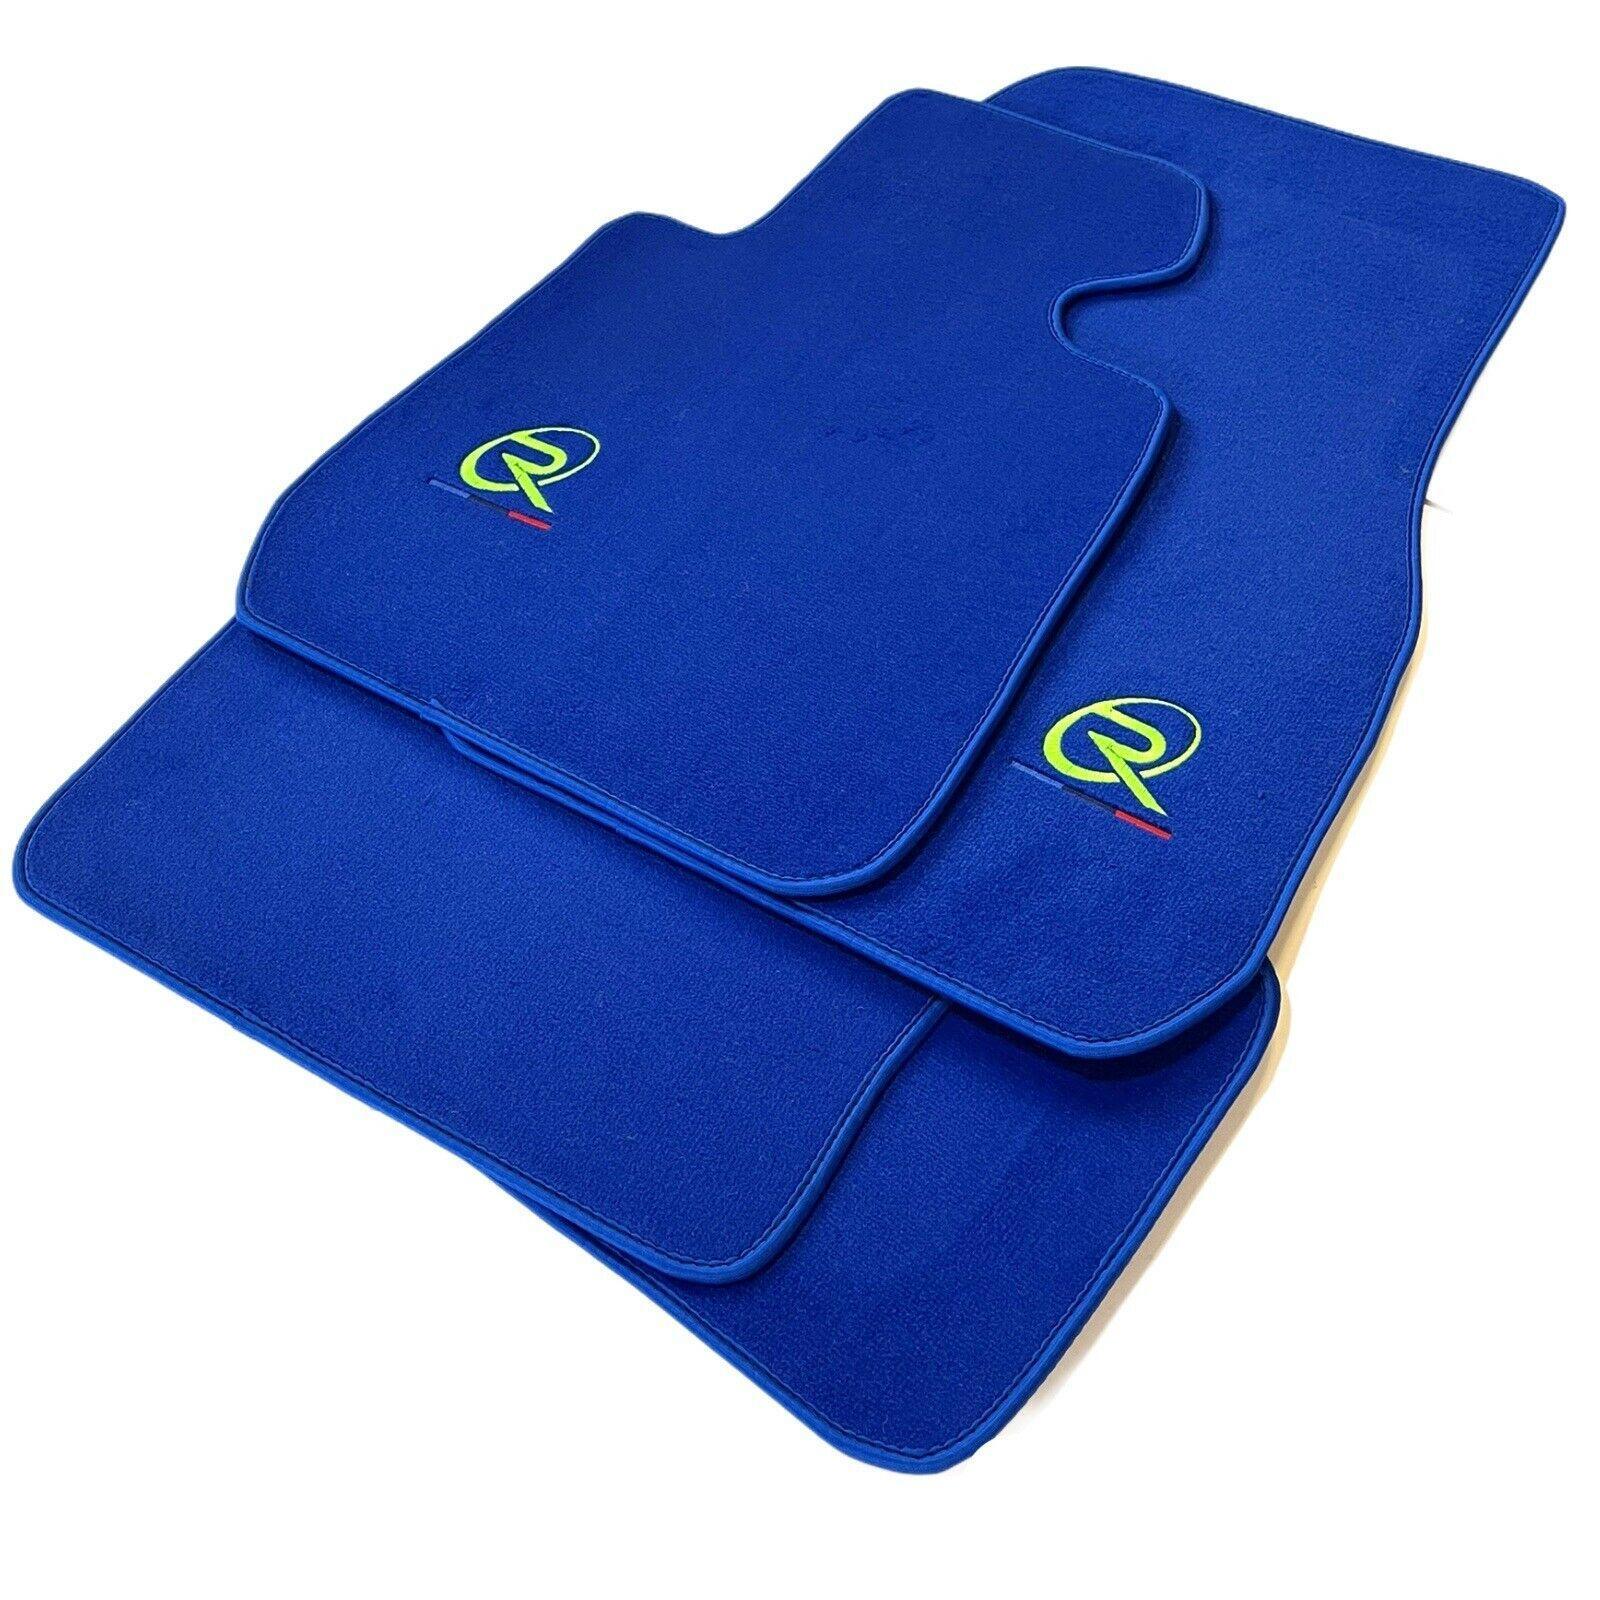 Blue Mats For BMW 3 Series E36 2-door Coupe Tailored Set Perfect Fit - AutoWin